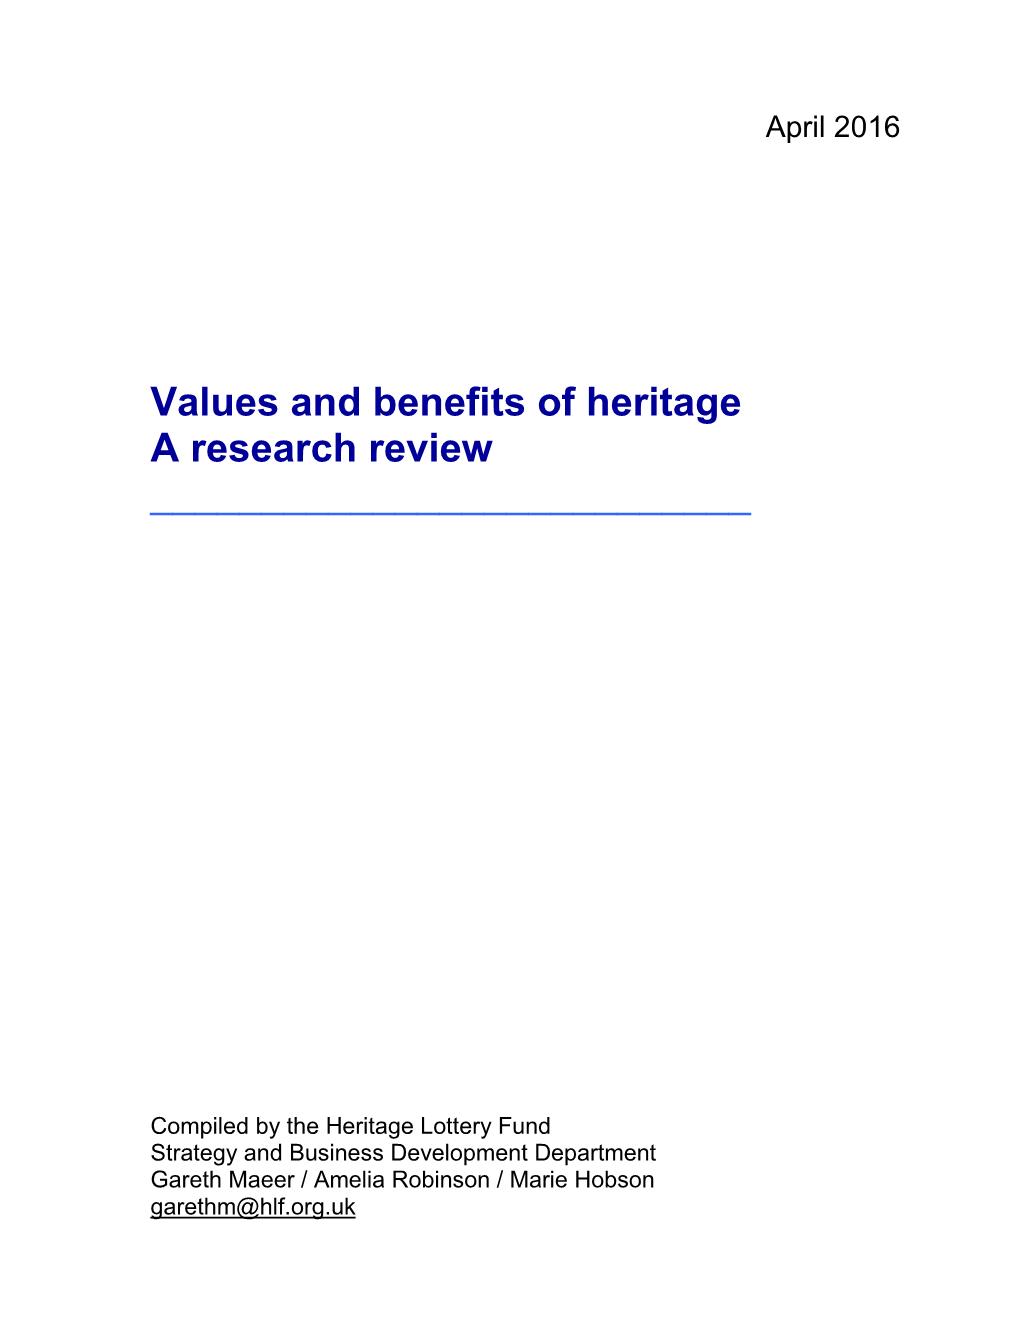 Values and Benefits of Heritage: a Research Review by HLF Strategy & Business Development Department